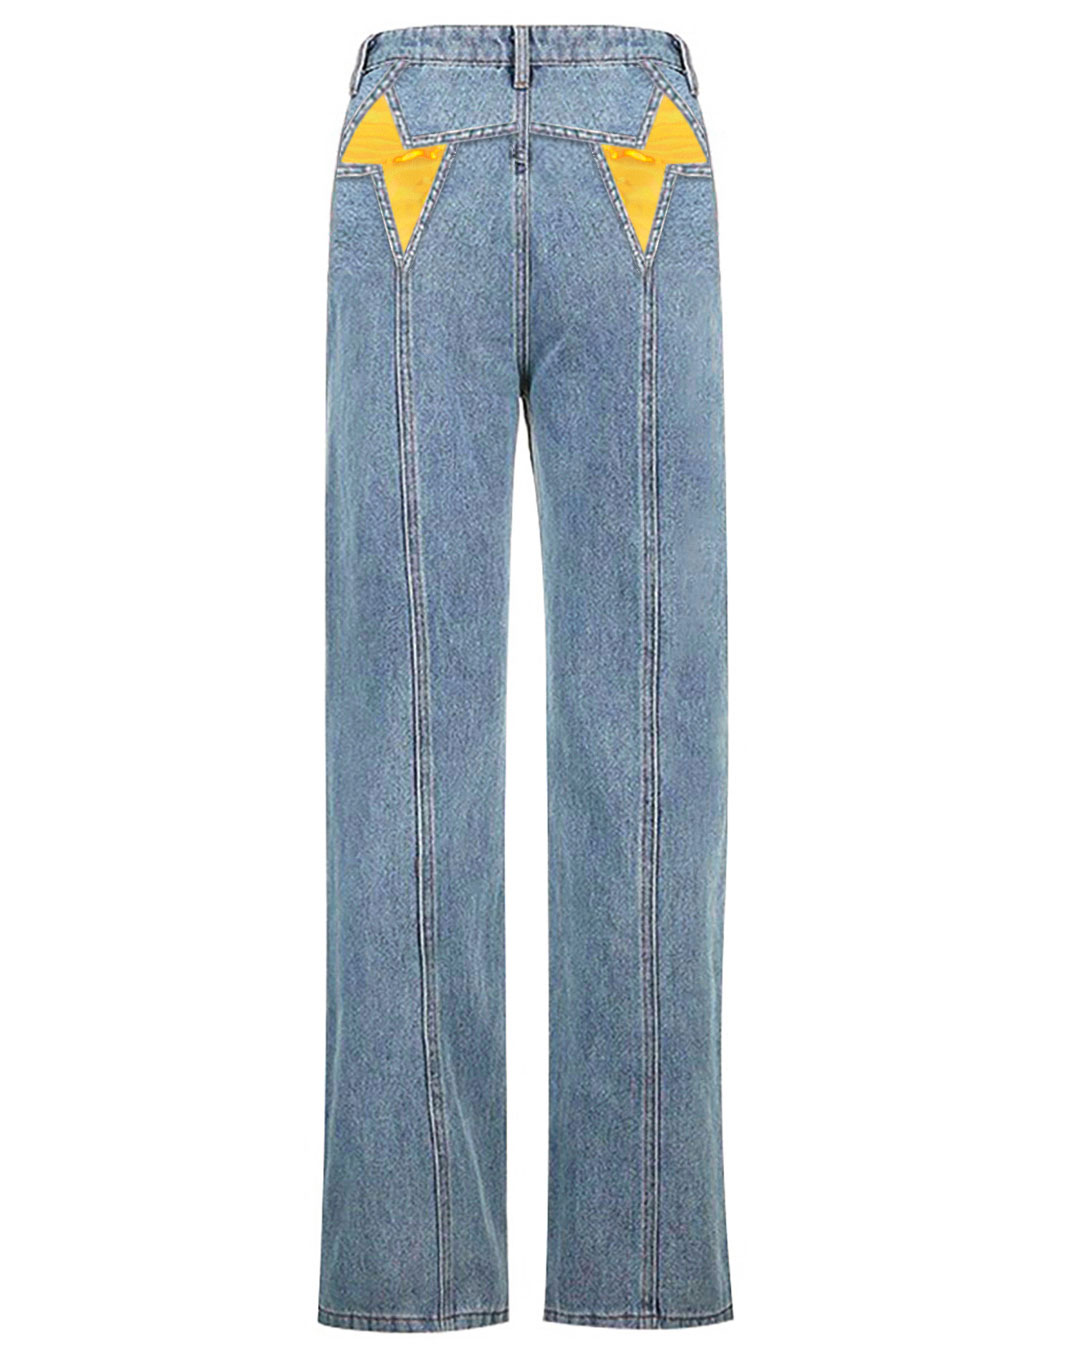 Star Patchy Flared Jeans